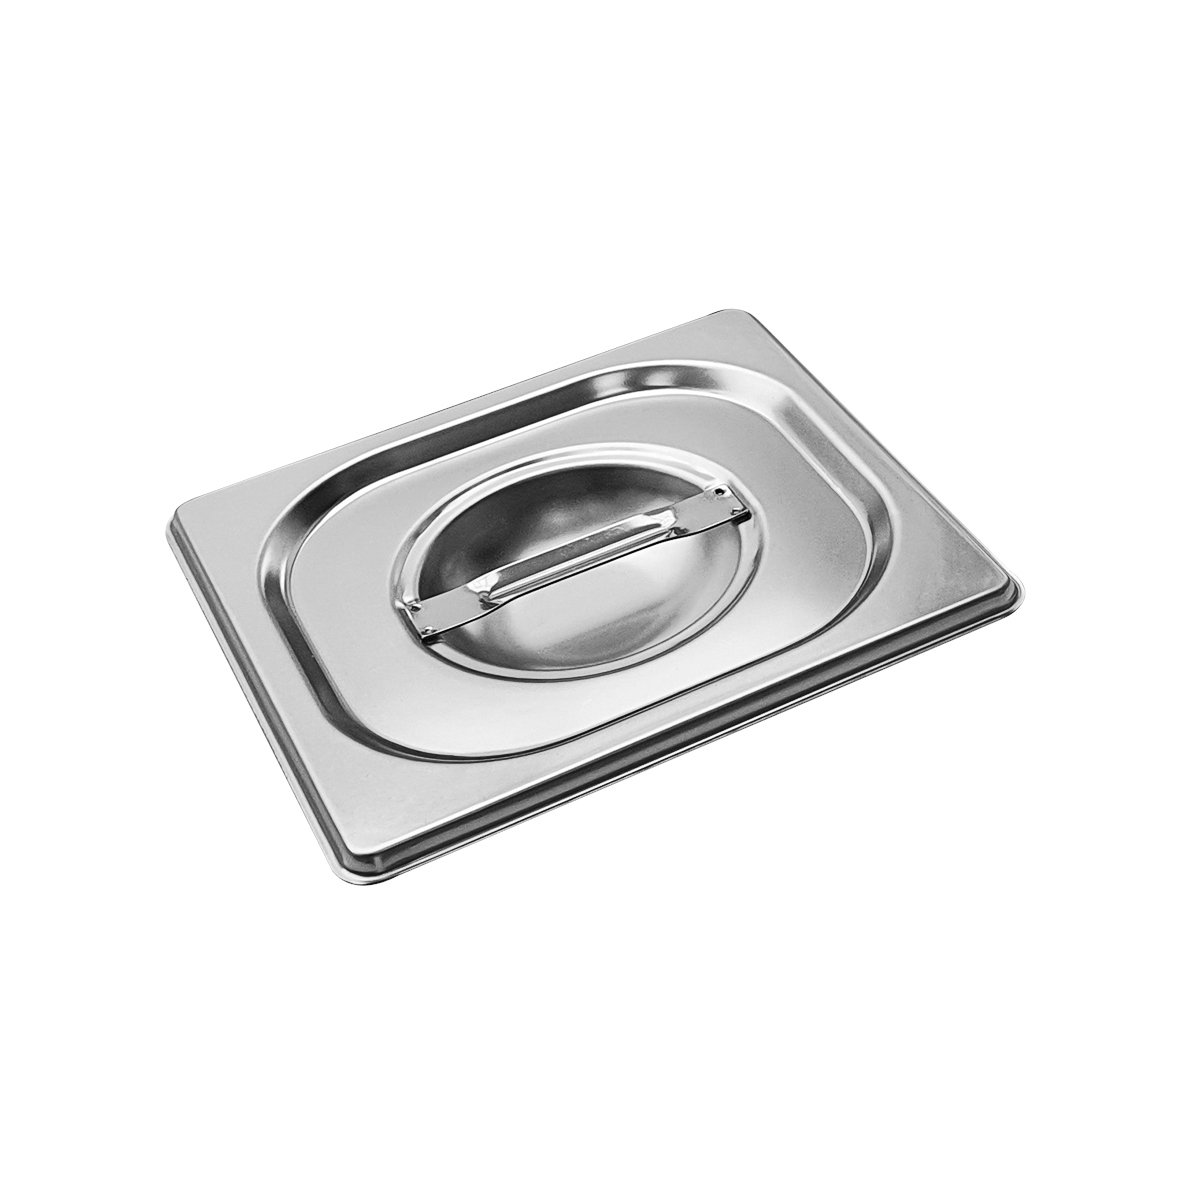 Cater-Cook 1/6 Stainless Steel Gastronorm Lid - CK4032